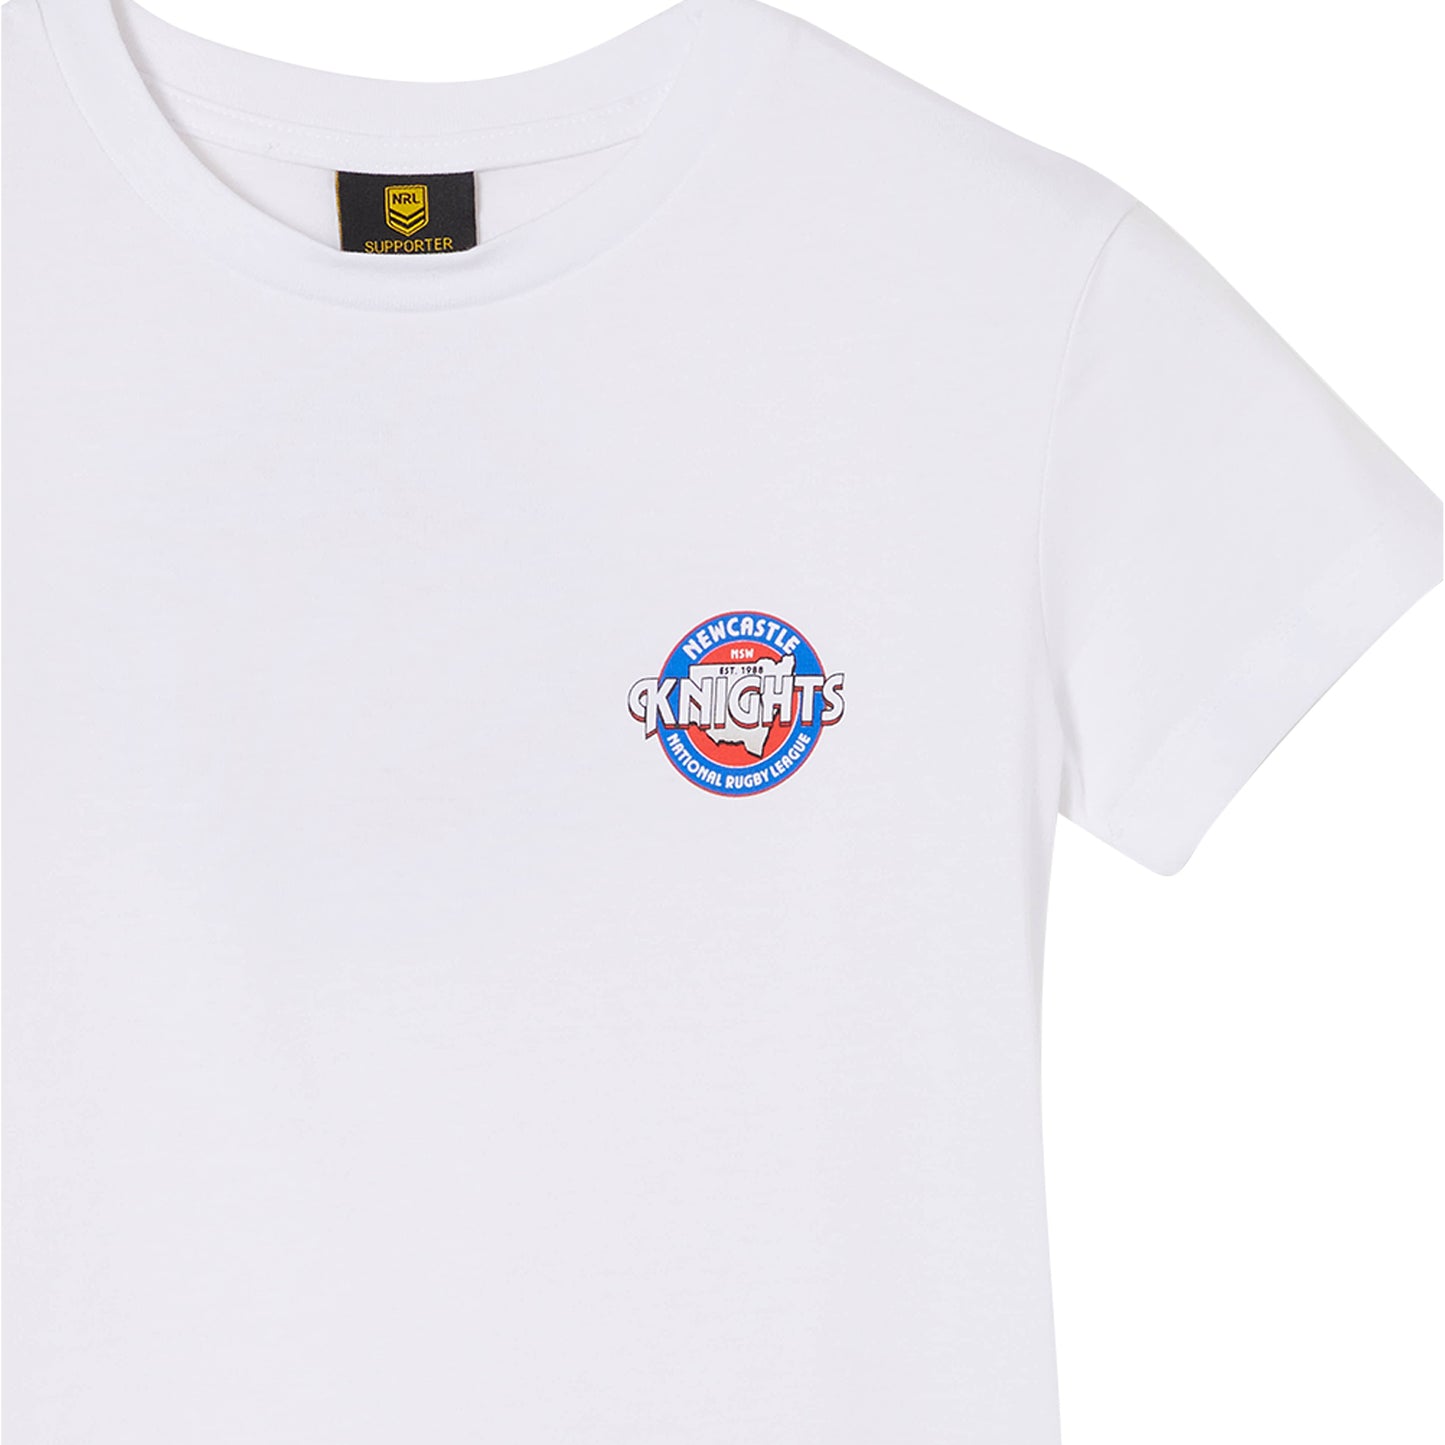 Newcastle Knights Youth Zephyr Tee